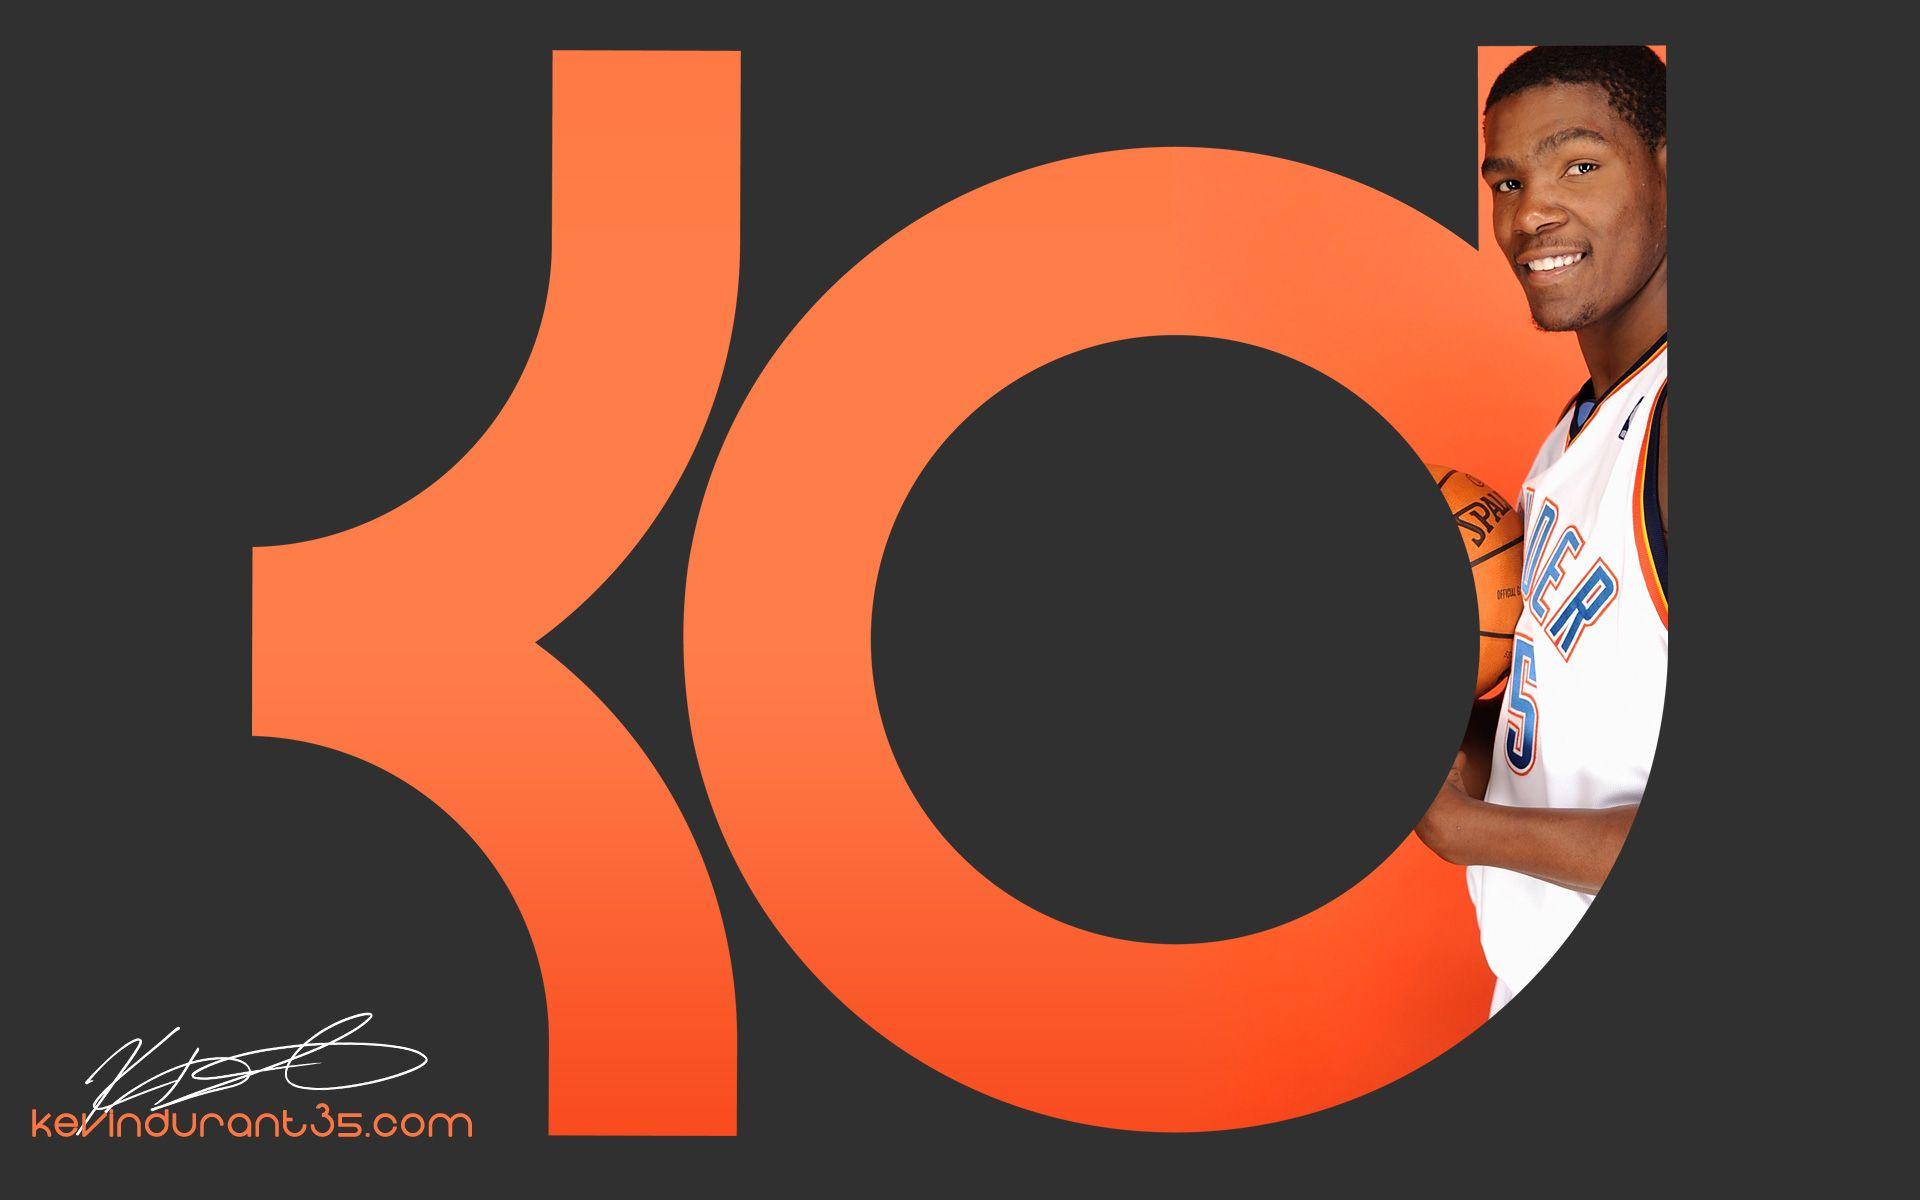 Kevin Durant's logo